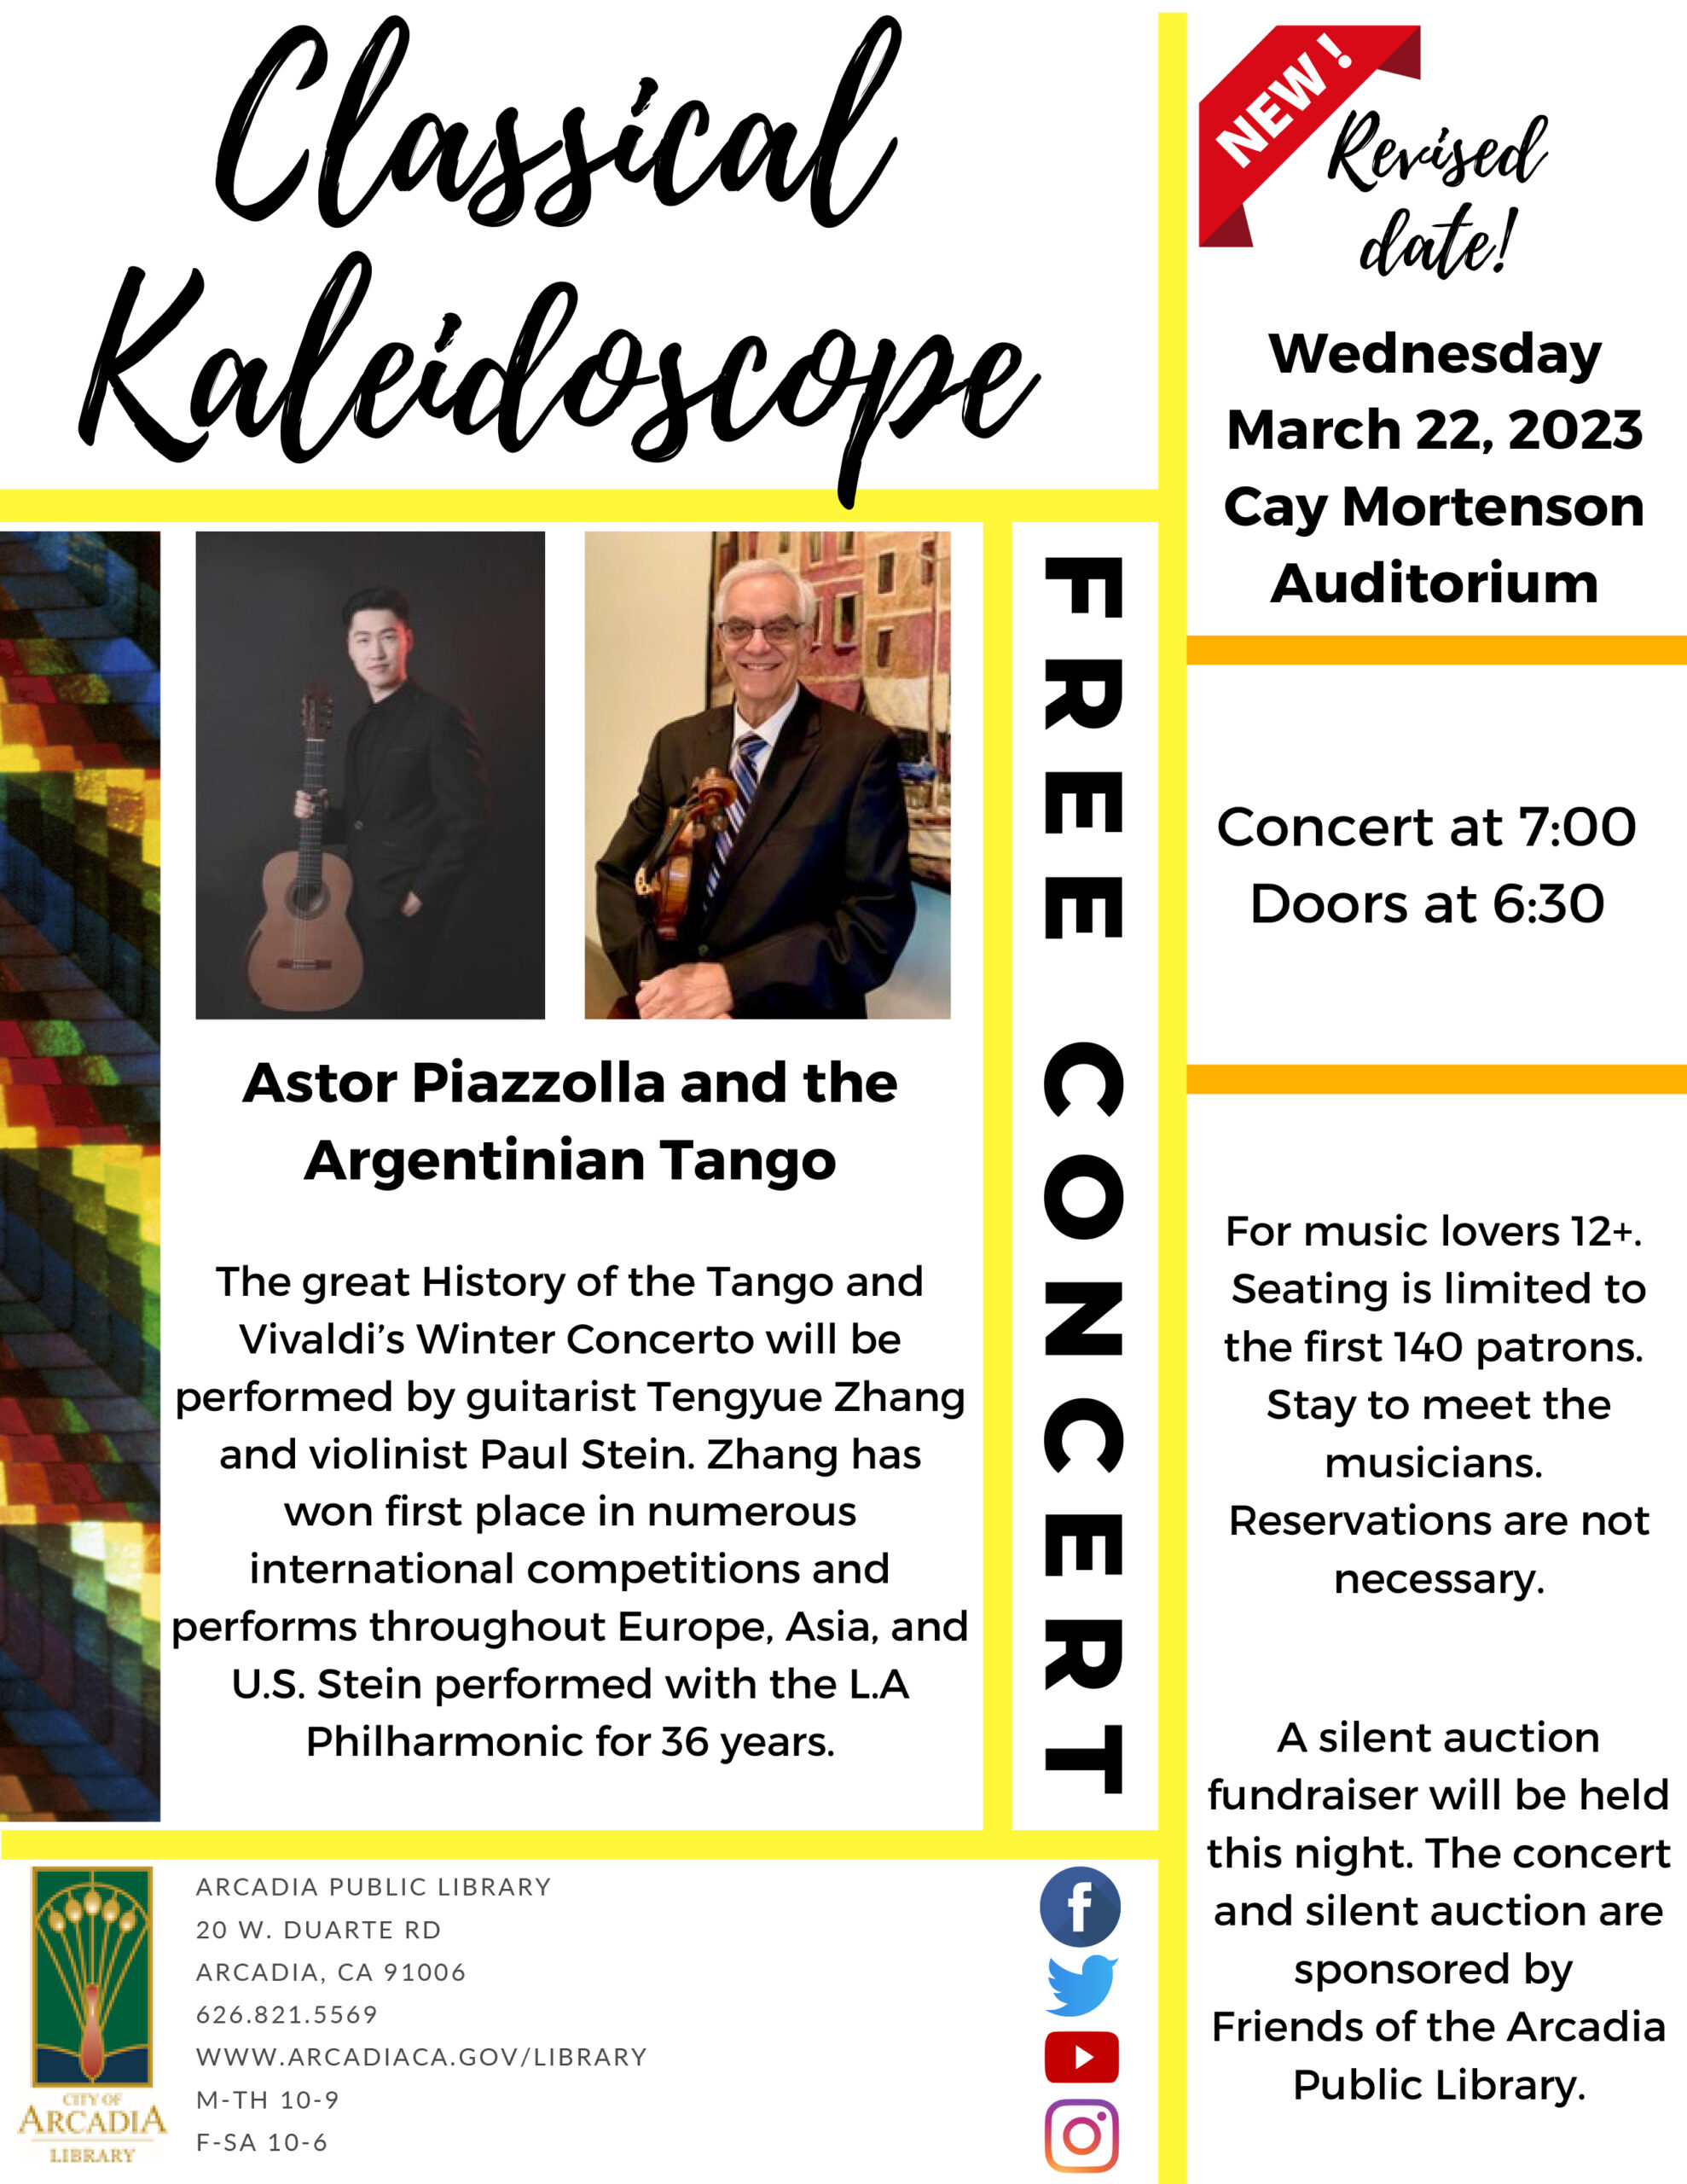 Classical Kaleidoscope at the Arcadia Public Library on March 22